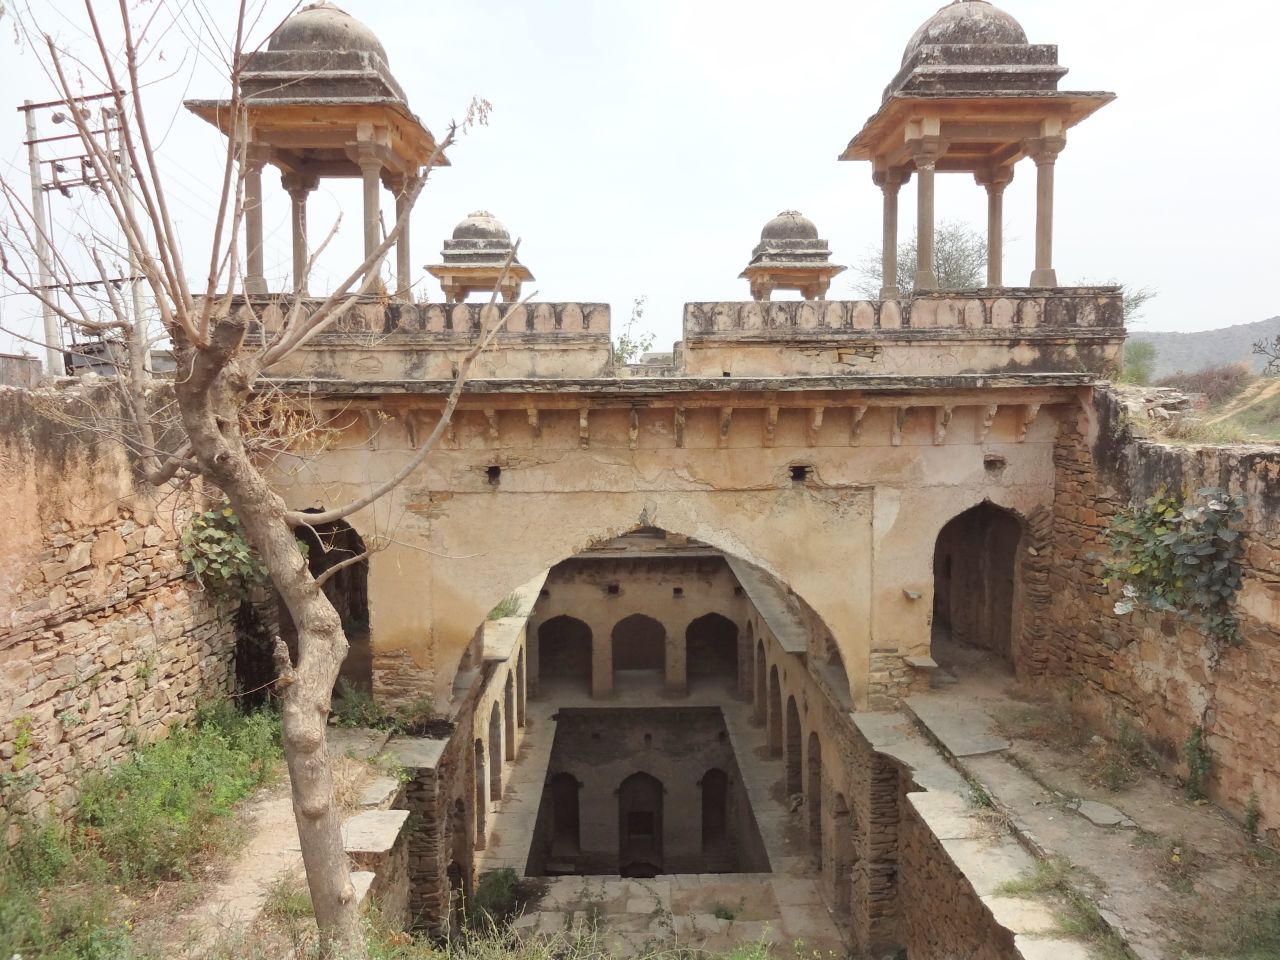 "It's not easy getting to this small stepwell in the fields outside the city of Narnaul, with its many spectacular Mughal monuments. But the dirt road eventually lead to pretty -- if overgrown -- stepwells, with its four chattris that come into view. What a peaceful spot in its day - I'm sorry this one's such a ruin."